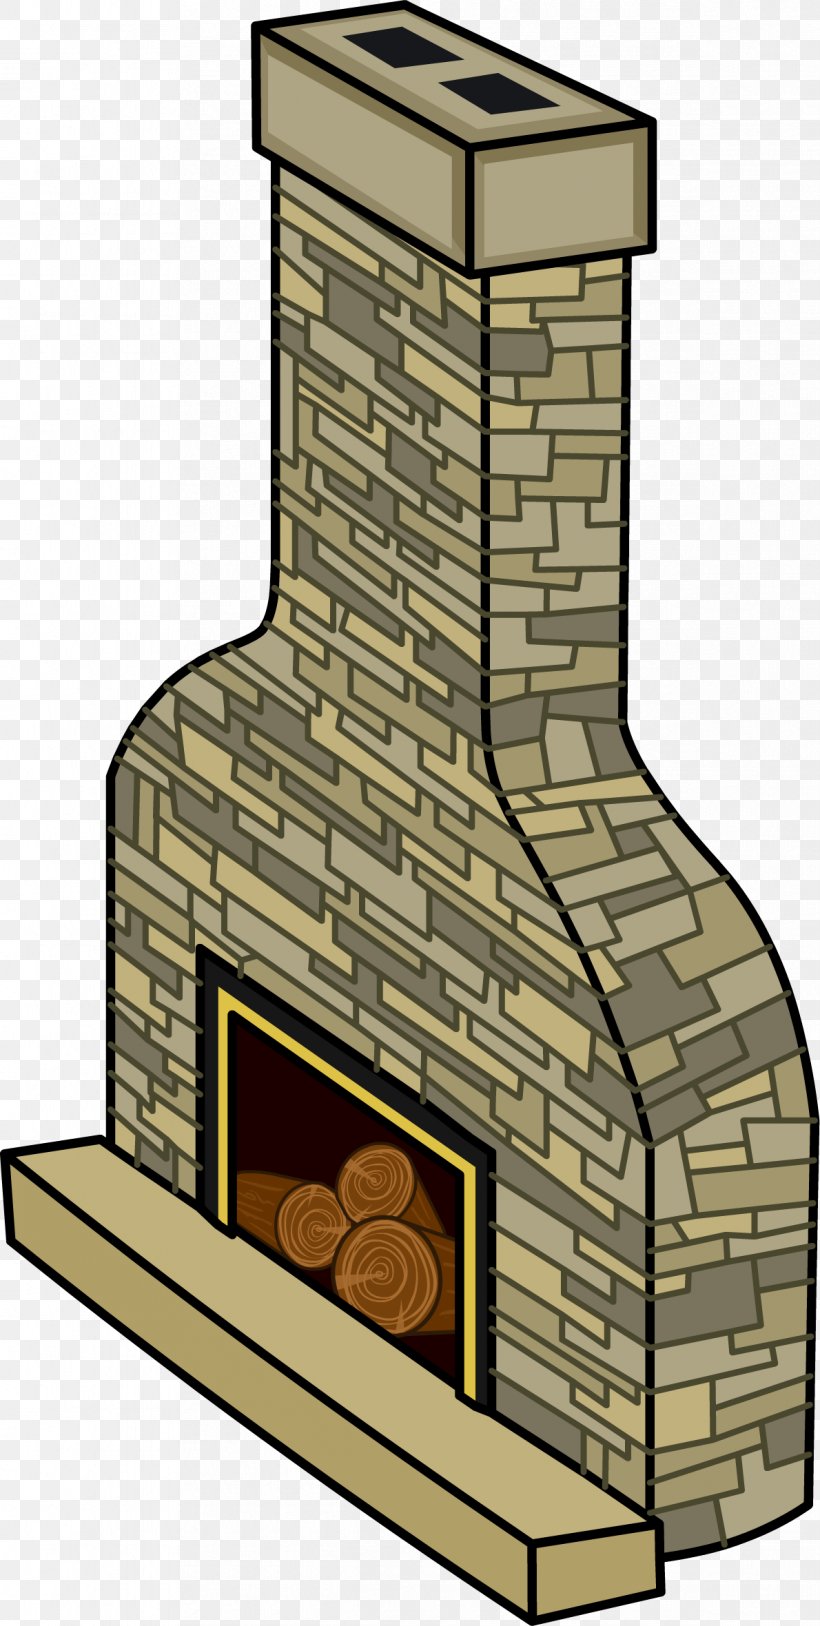 Hearth Fireplace Image Clip Art, PNG, 1190x2360px, Hearth, Brick, Cartoon, Chimney, Electric Fireplace Download Free